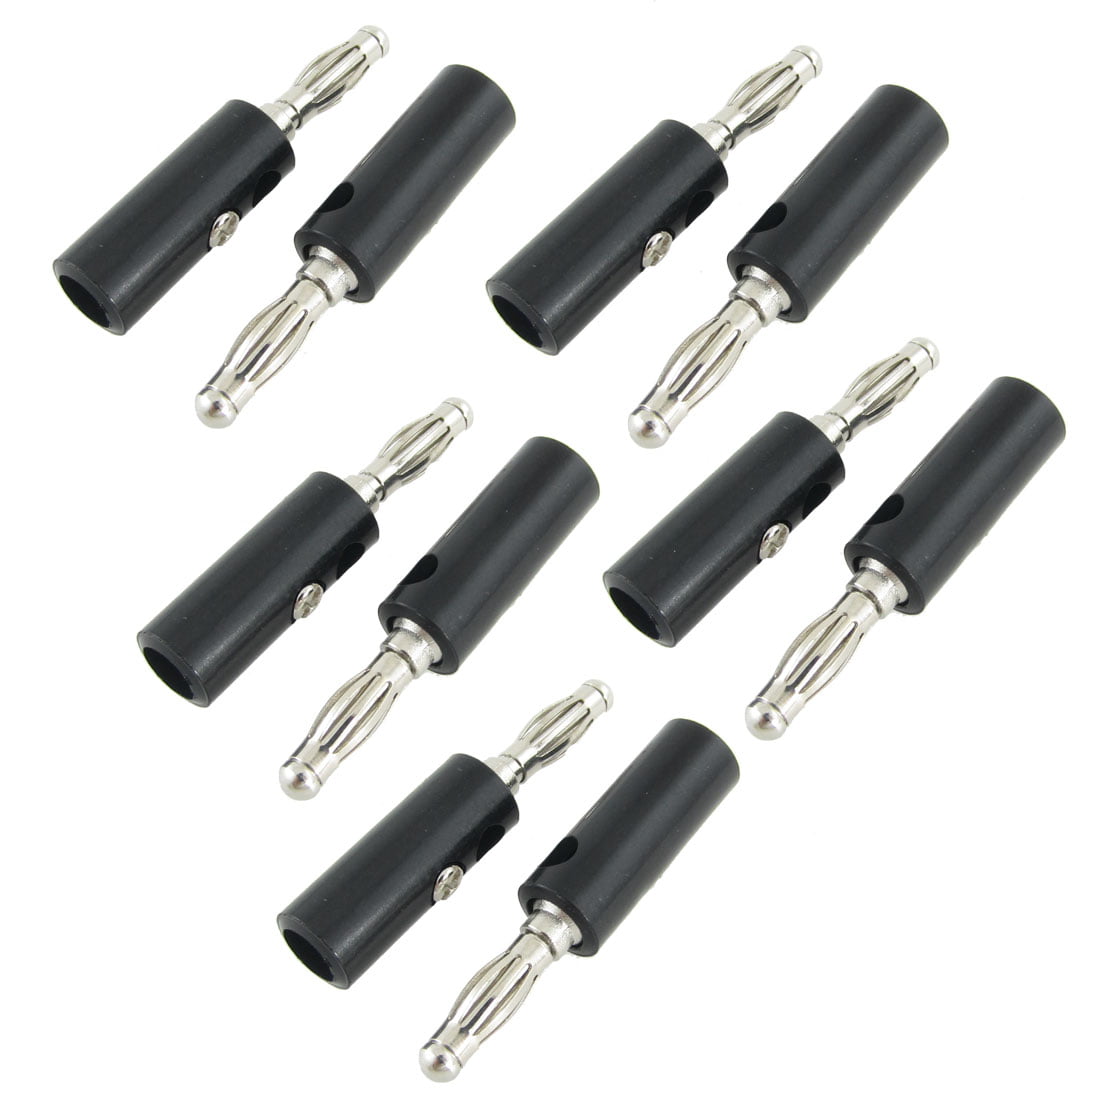 Color : Black 20 Pcs in One Package, The Price is for 20 Pcs Simple and Practical Fire bird Audio Connecting Cable DIY Binding Post Terminals Yellow Yellow 